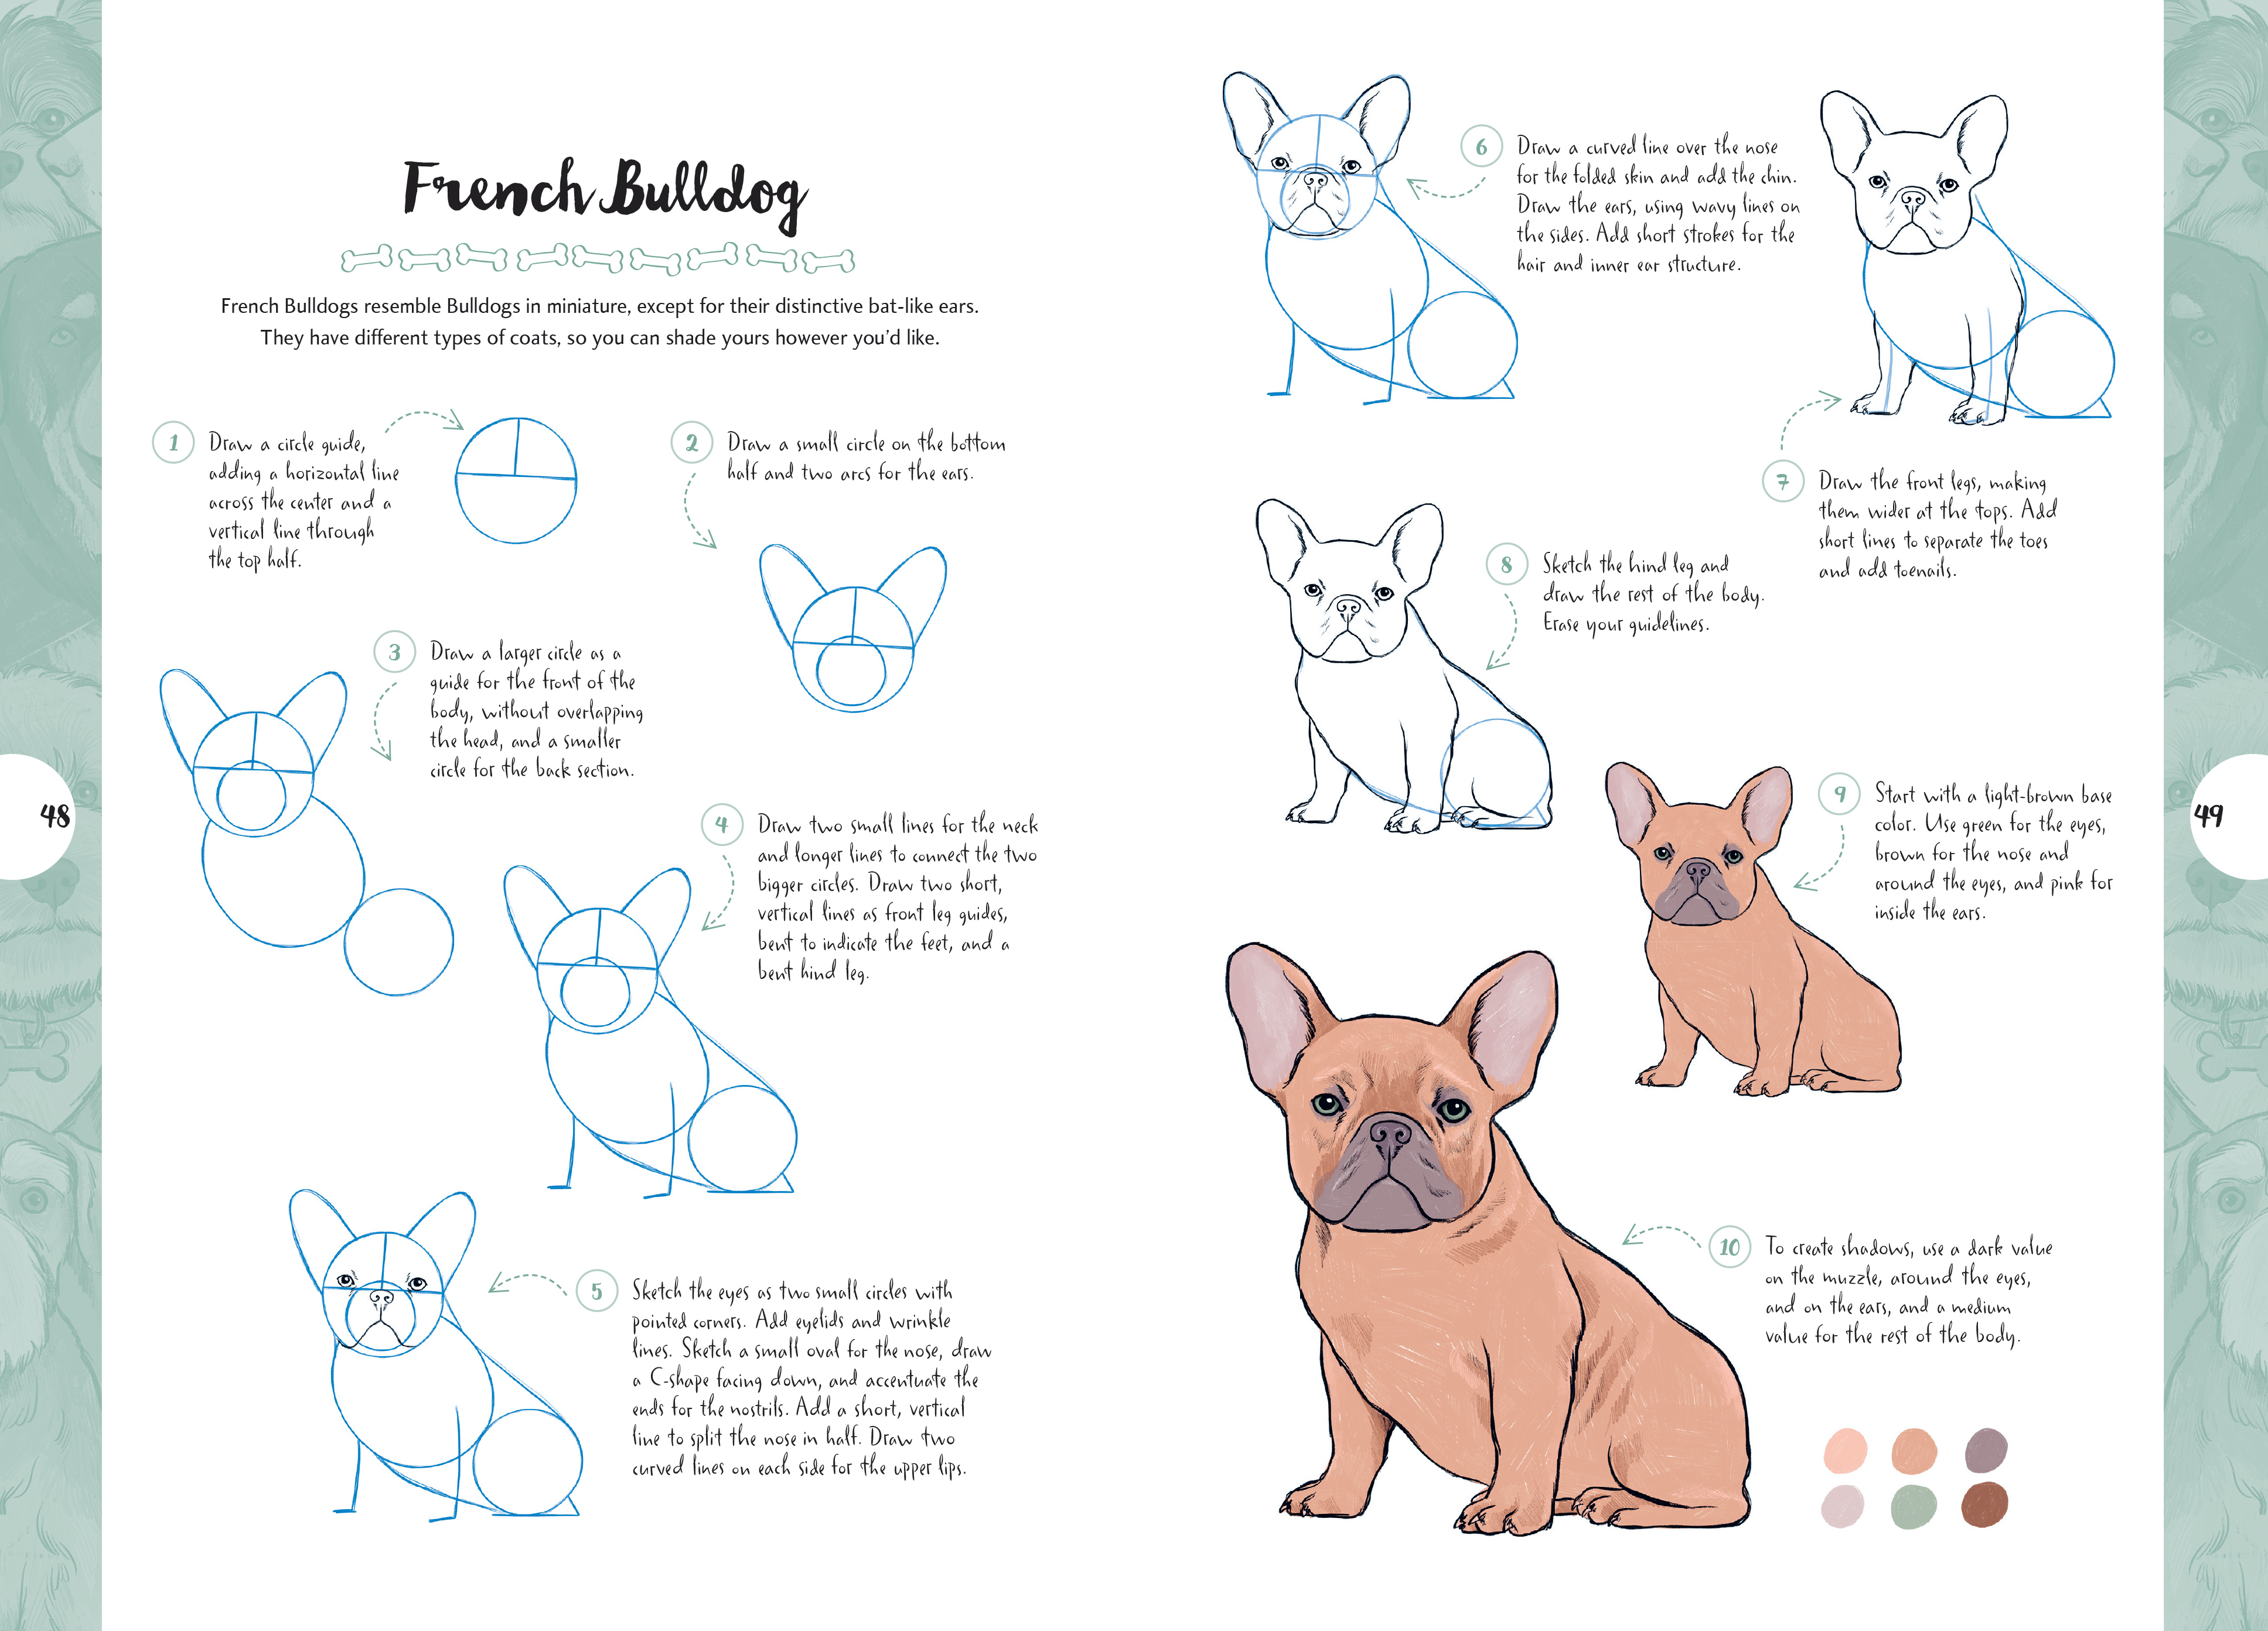 Ten-Step Drawing: Dogs